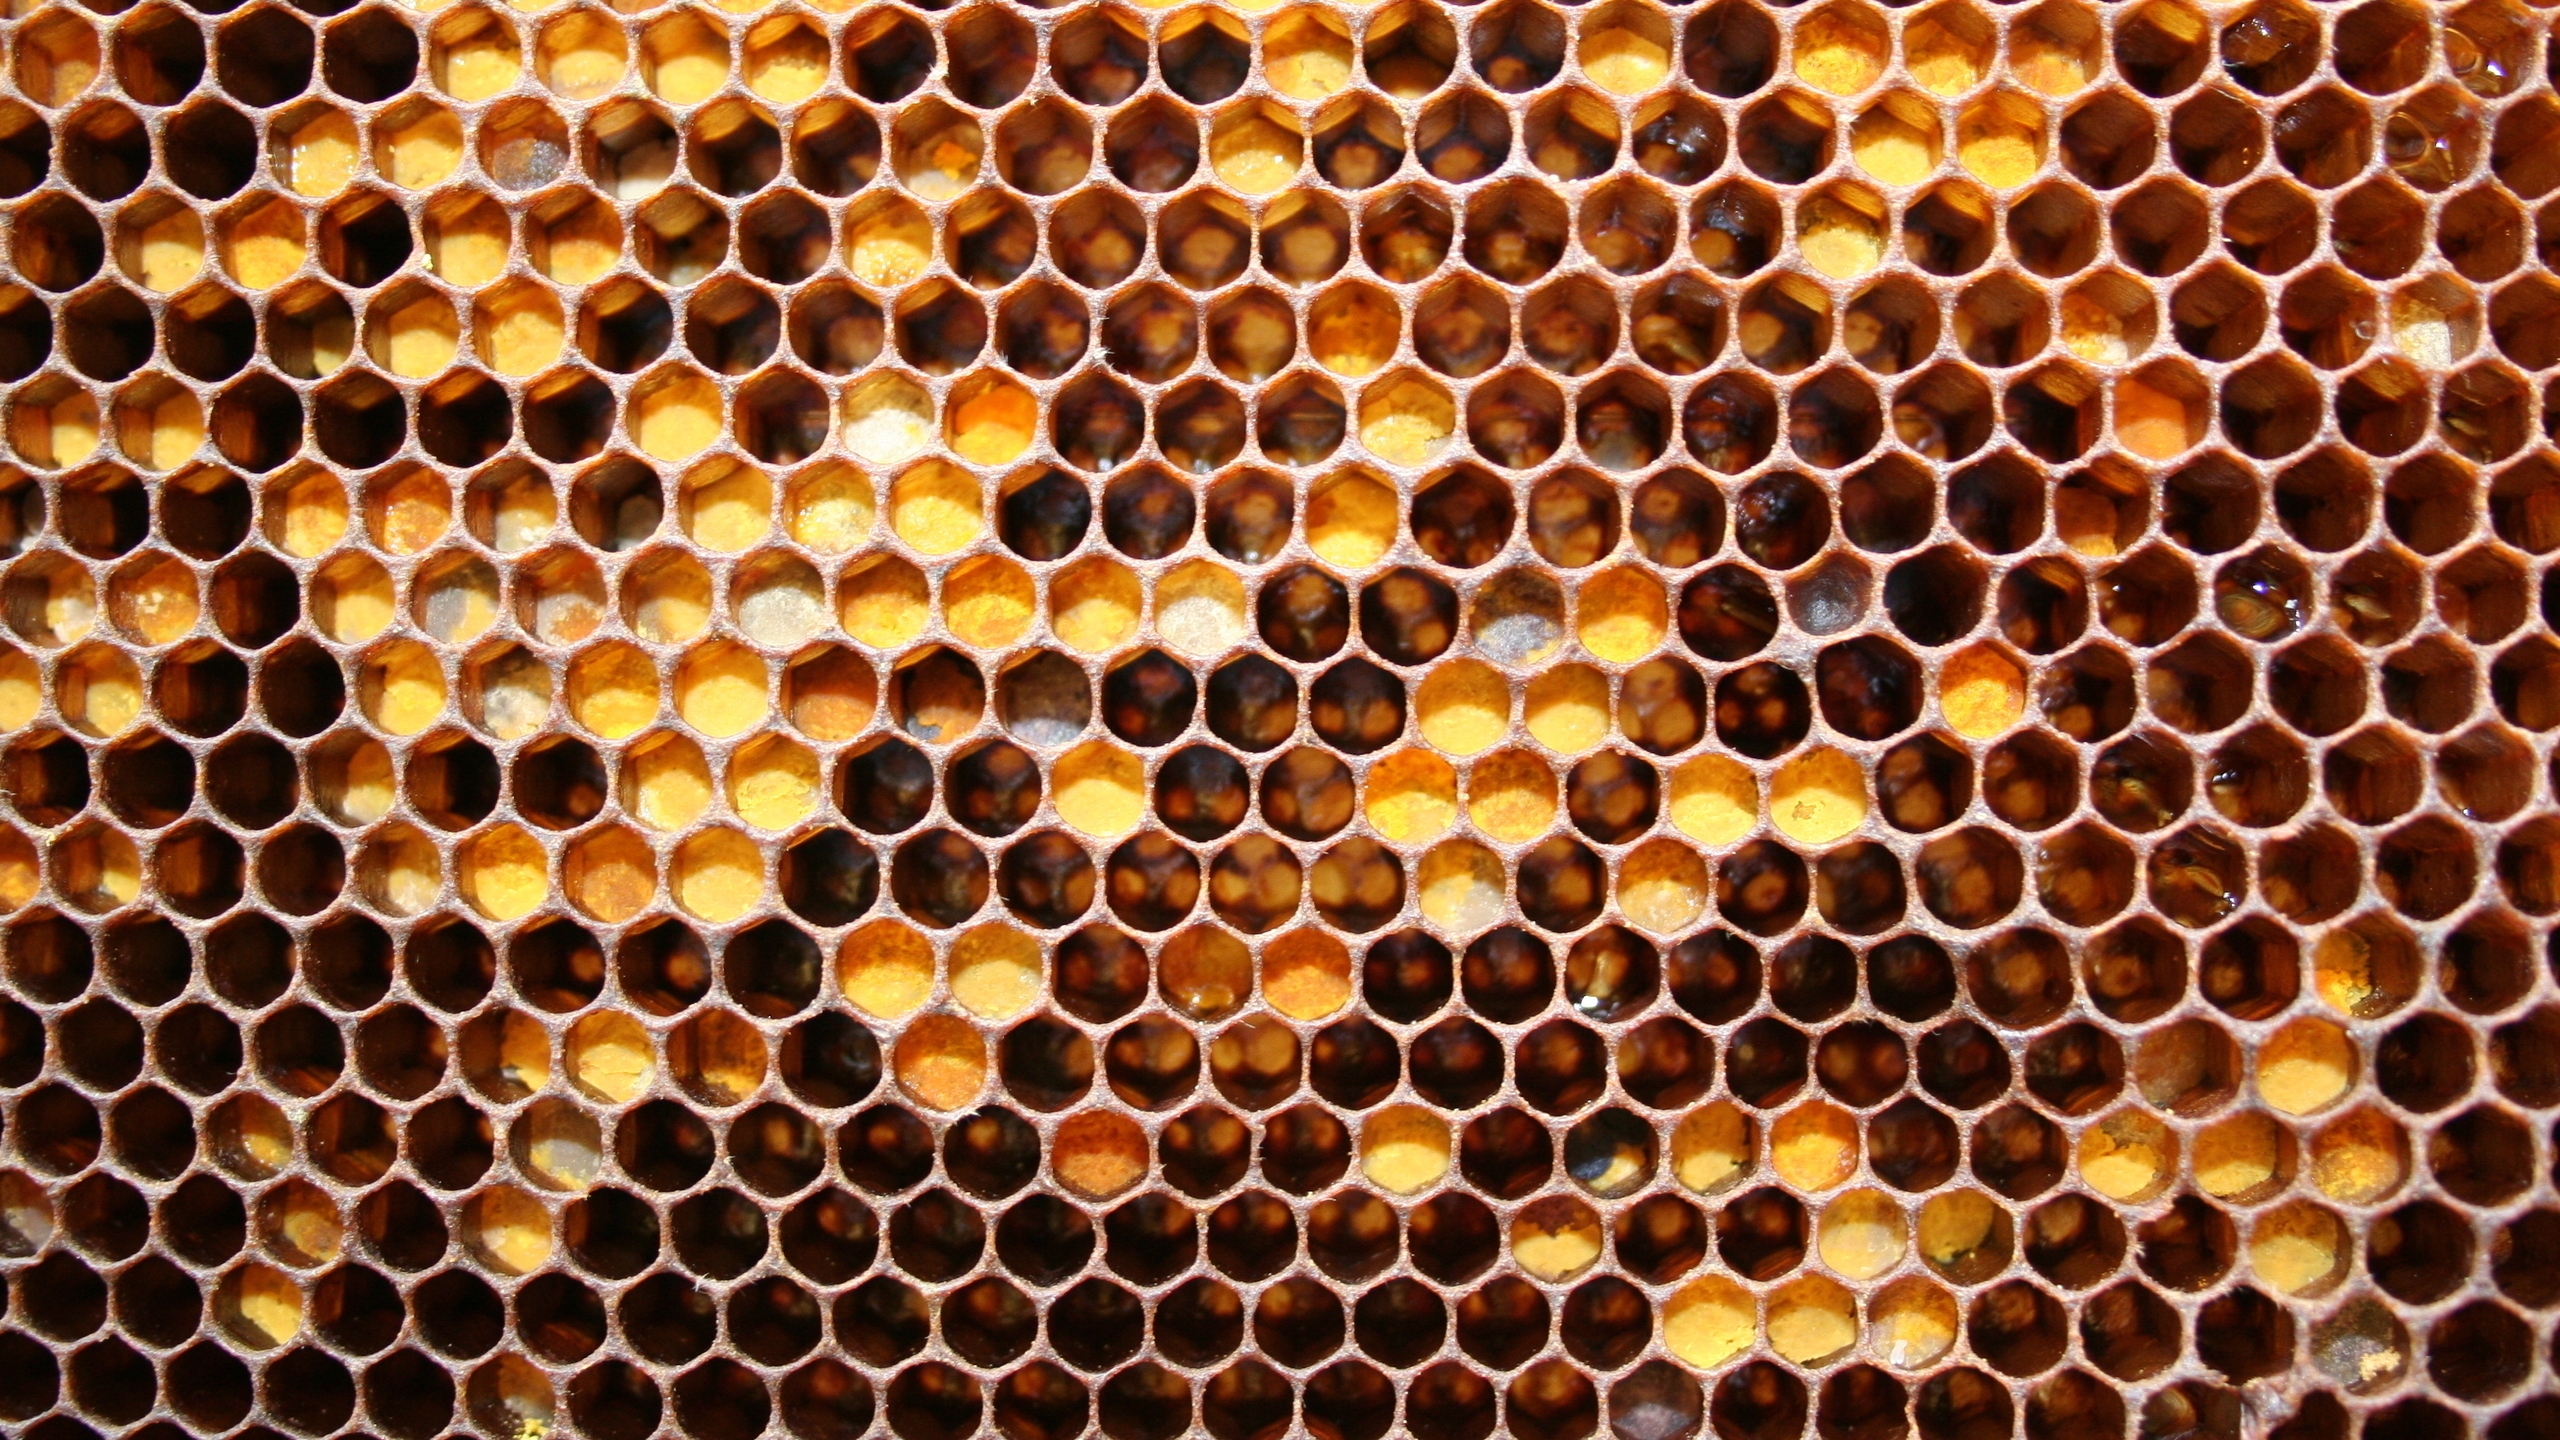 Bee Honeycomb for 2560x1440 HDTV resolution